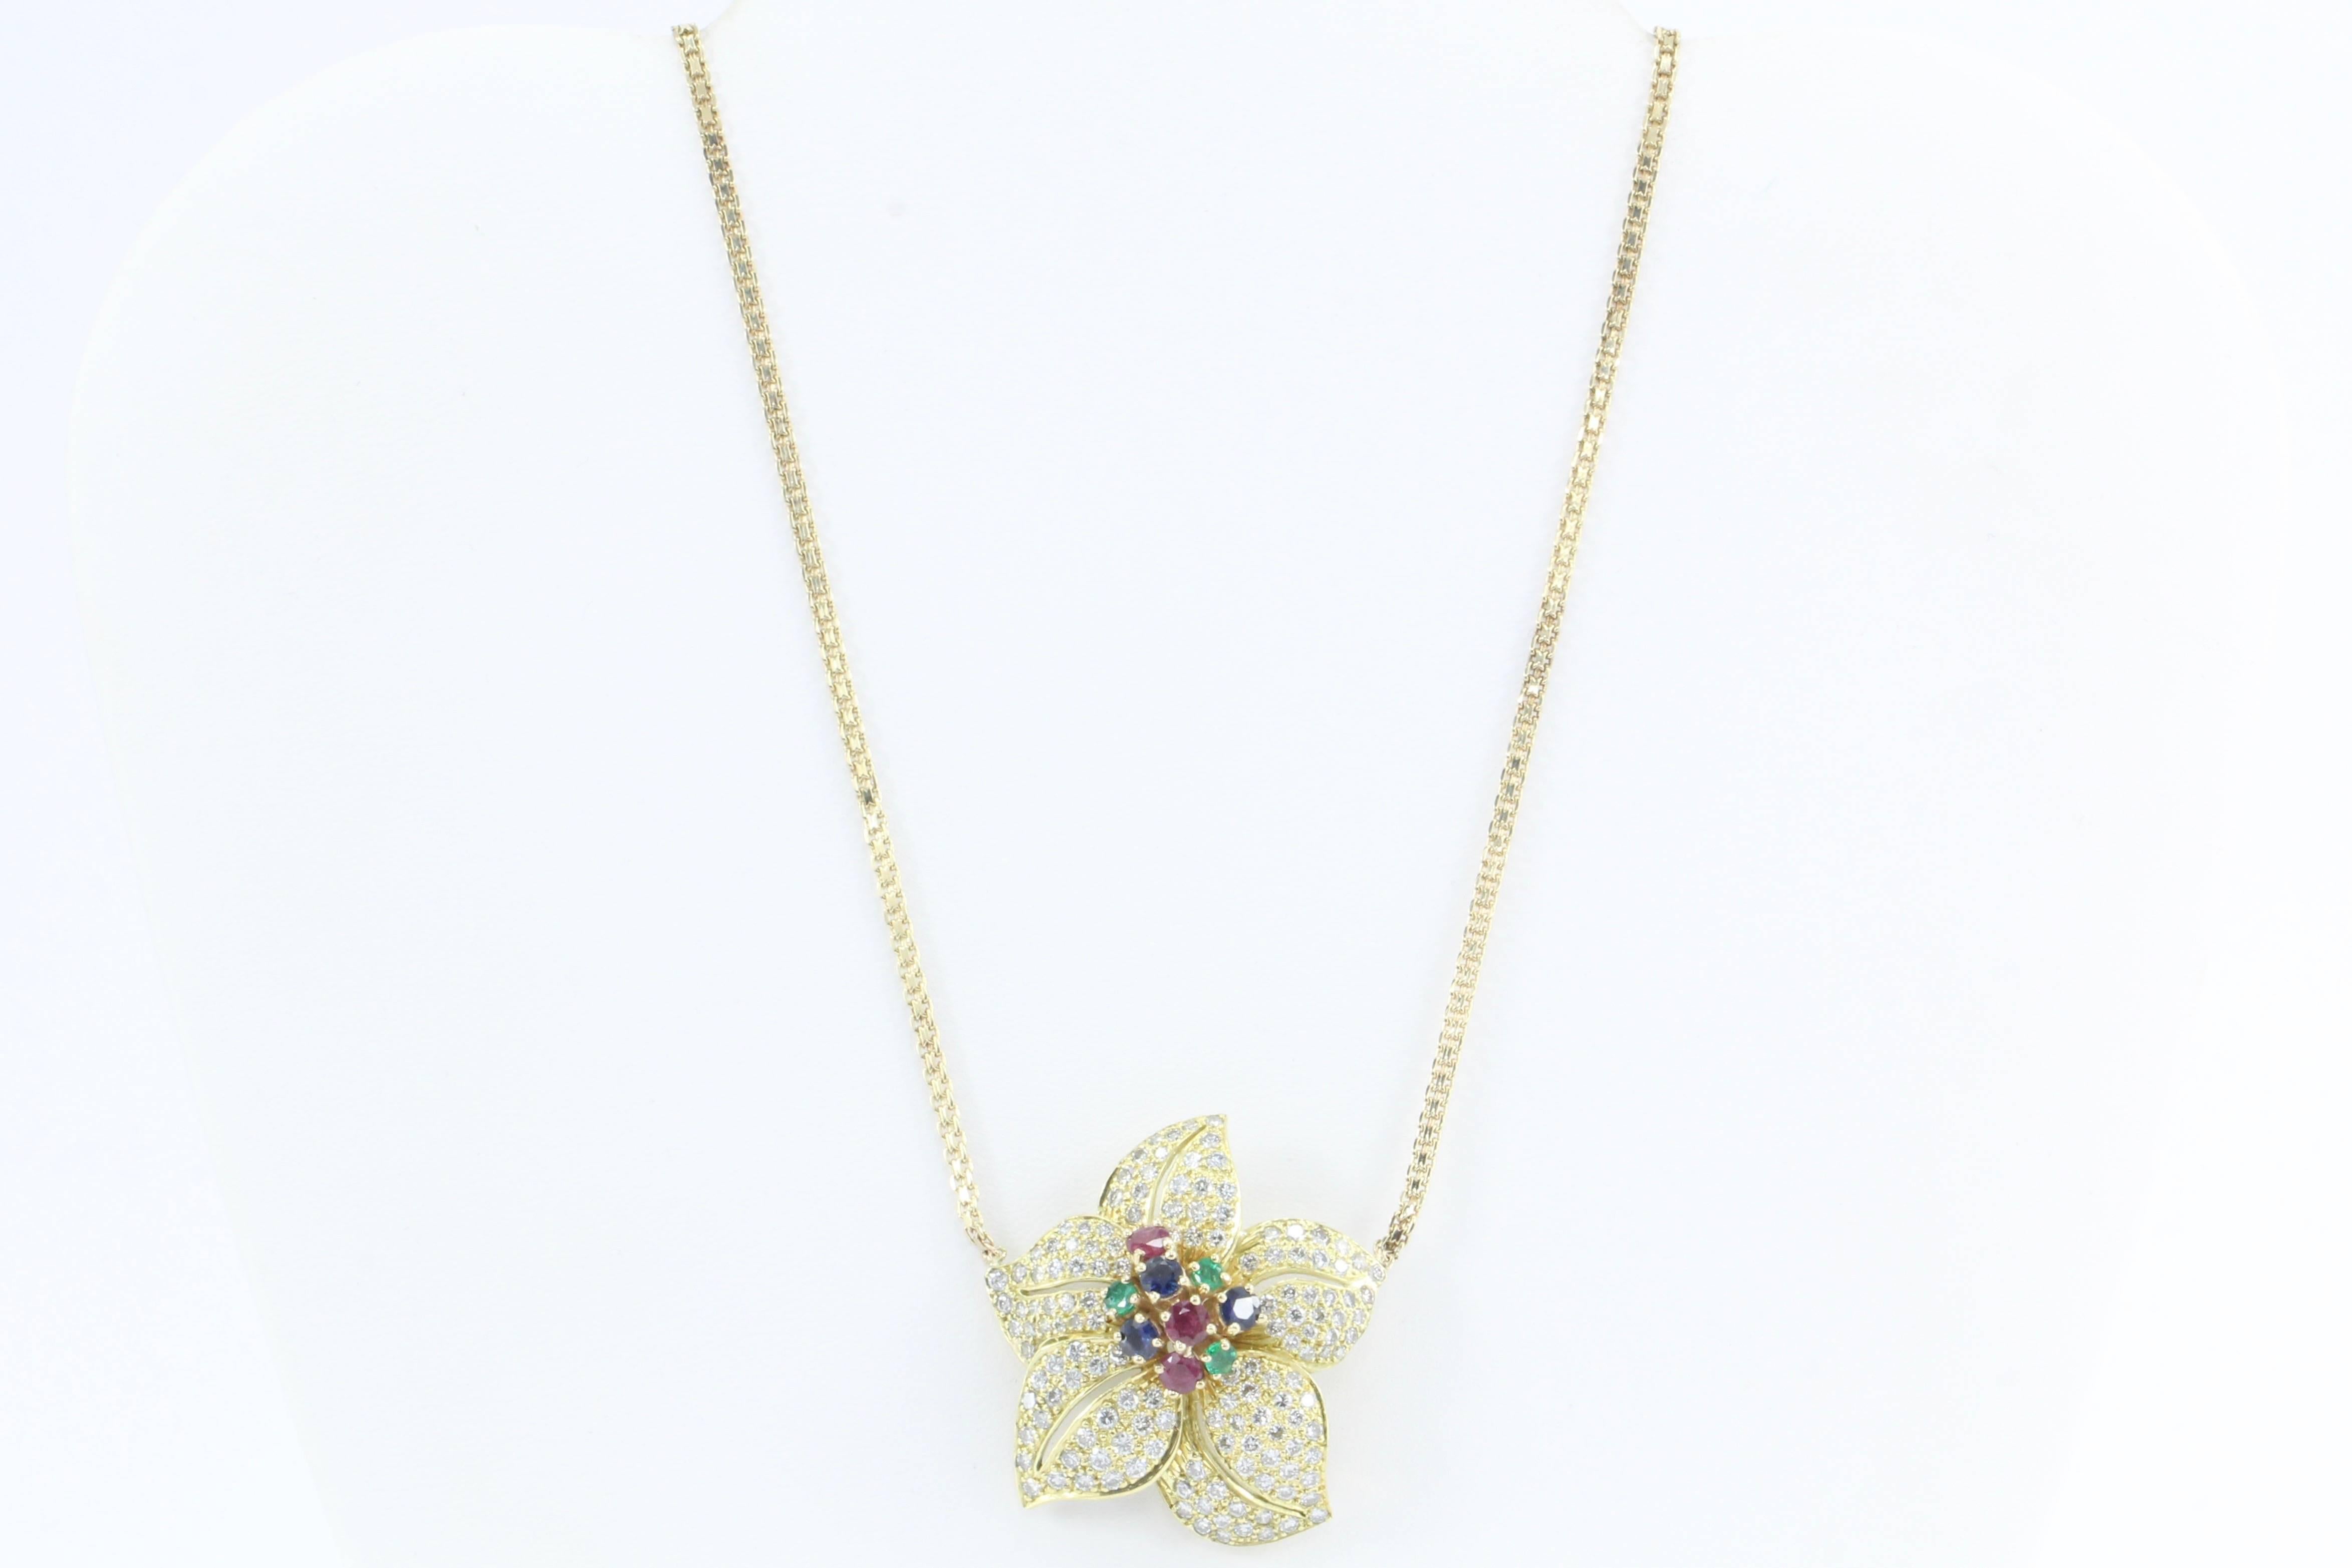 Retro Gold Diamond Emerald Ruby Sapphire Chunky Flower Necklace

Luxurious large tropical flower petals studded in diamonds frame a cluster of natural rubies, emeralds, and sapphires. The flower is 18K yellow gold and the chain is 14k yellow gold.